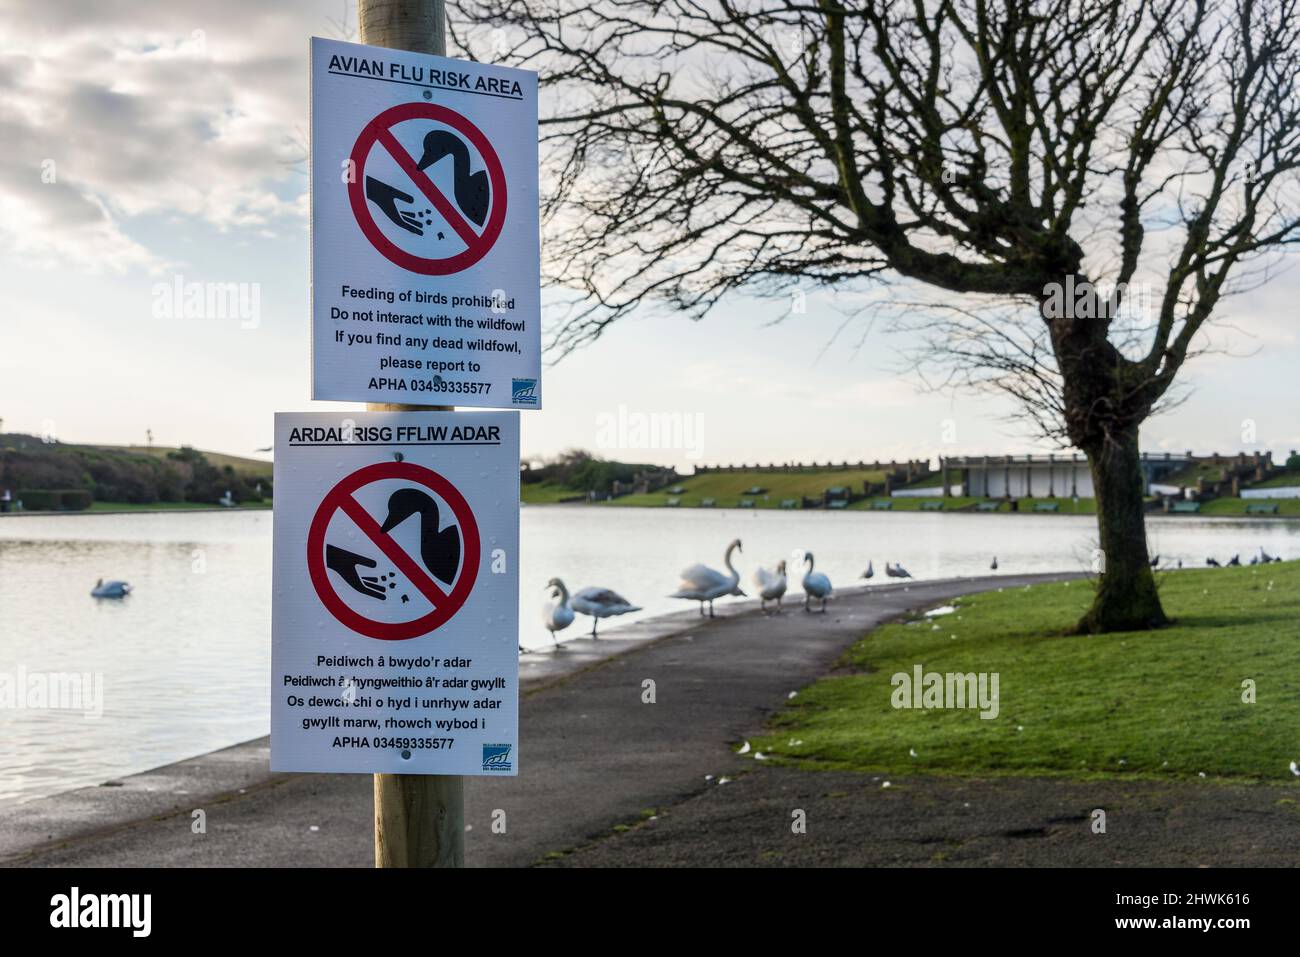 Temporary signs in Welsh language and English in a public park warning that avian flu, bird flu, is present among swans seen in the background. Stock Photo